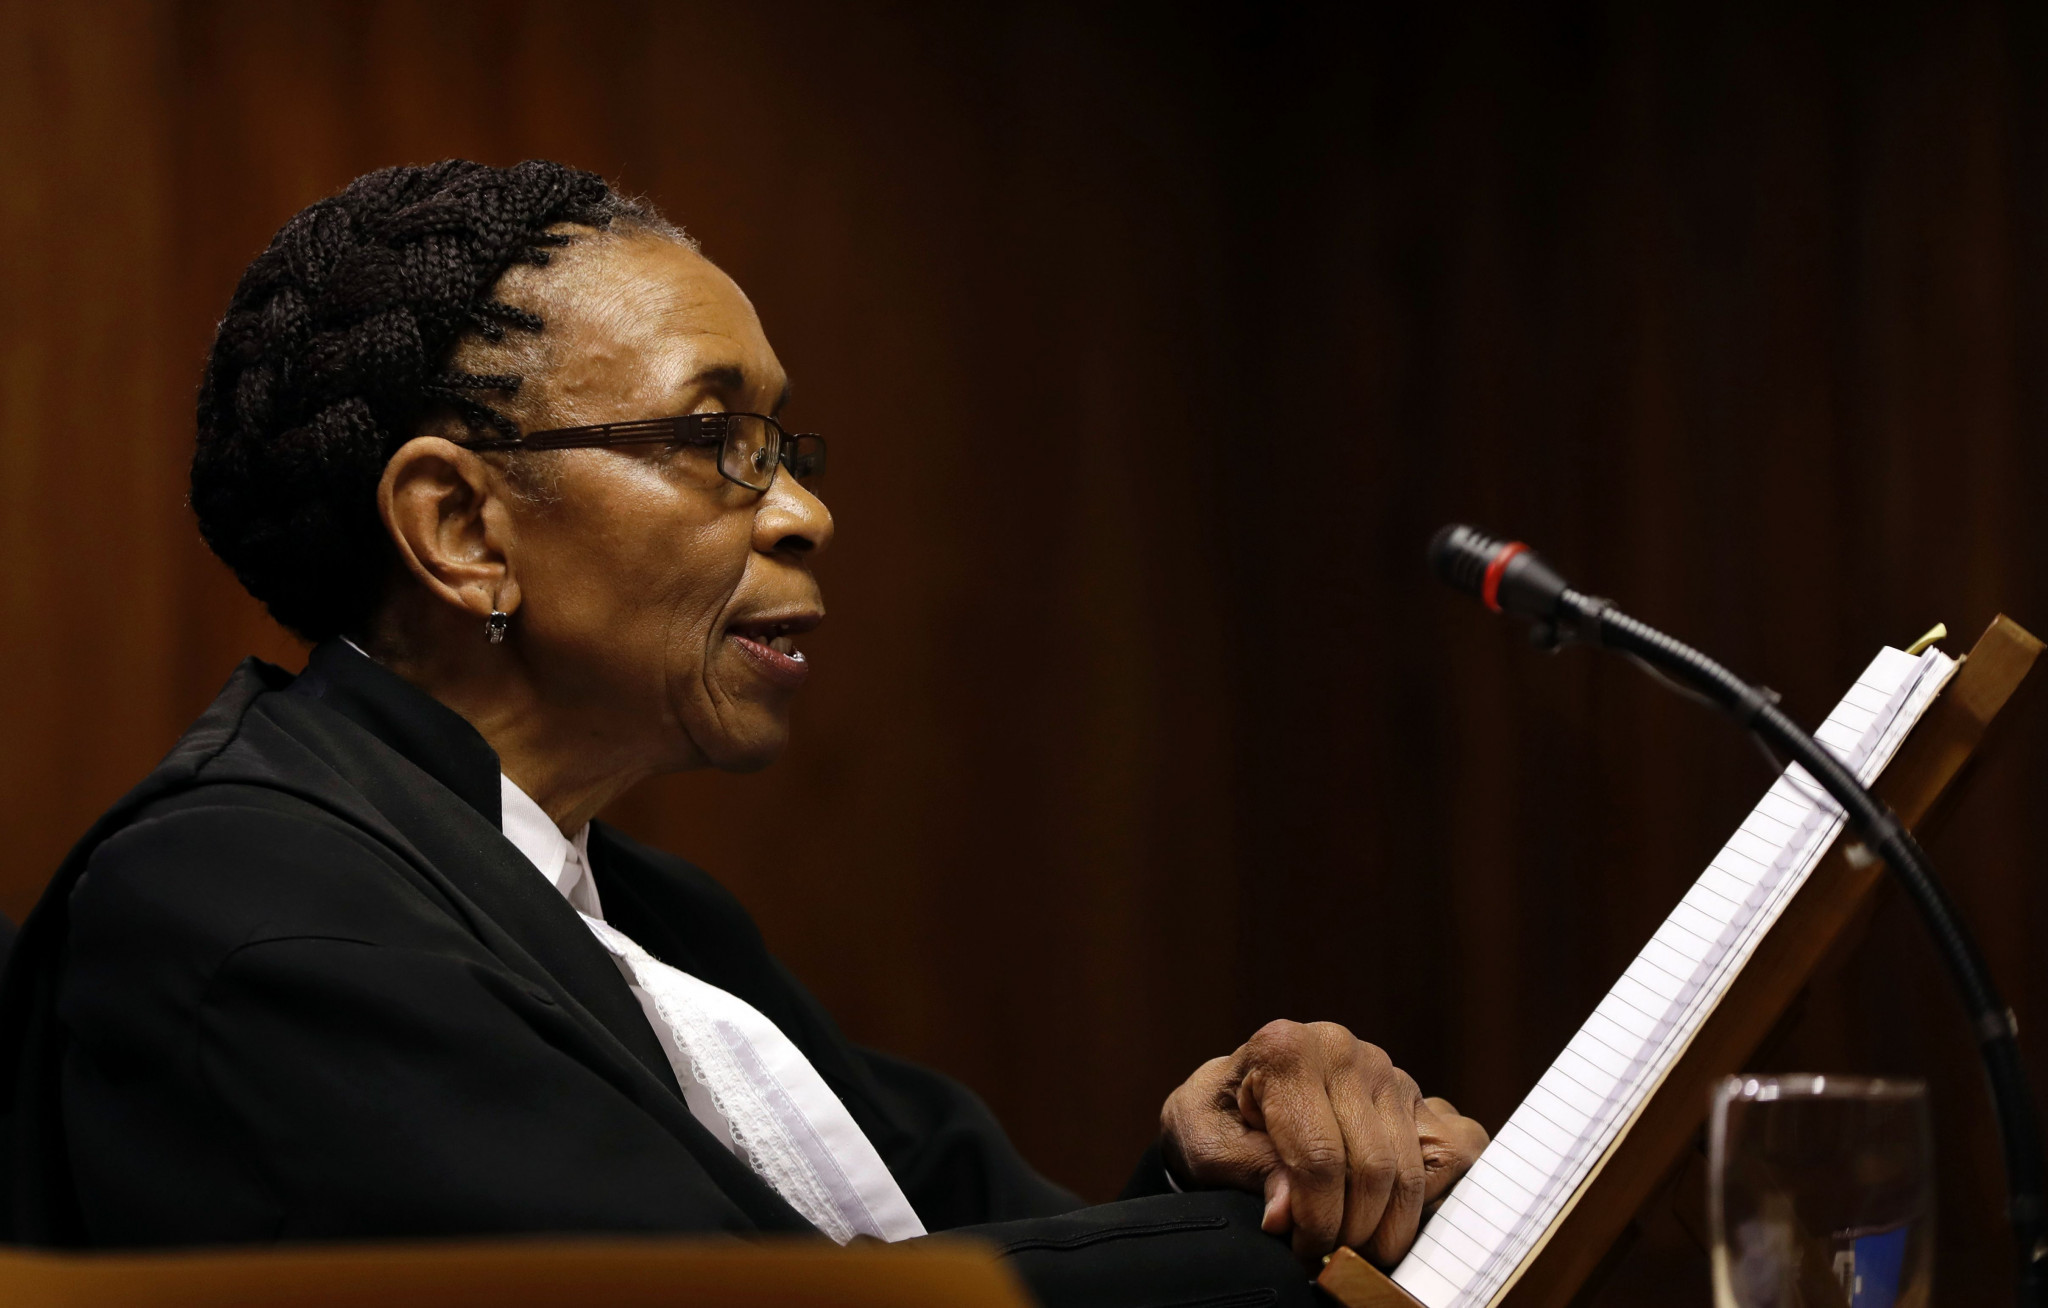 Judge Thokozile Masipa had initially sentenced Pistorius to five years for culpable homicide - the equivalent of manslaughter - in 2014 ©Getty Images